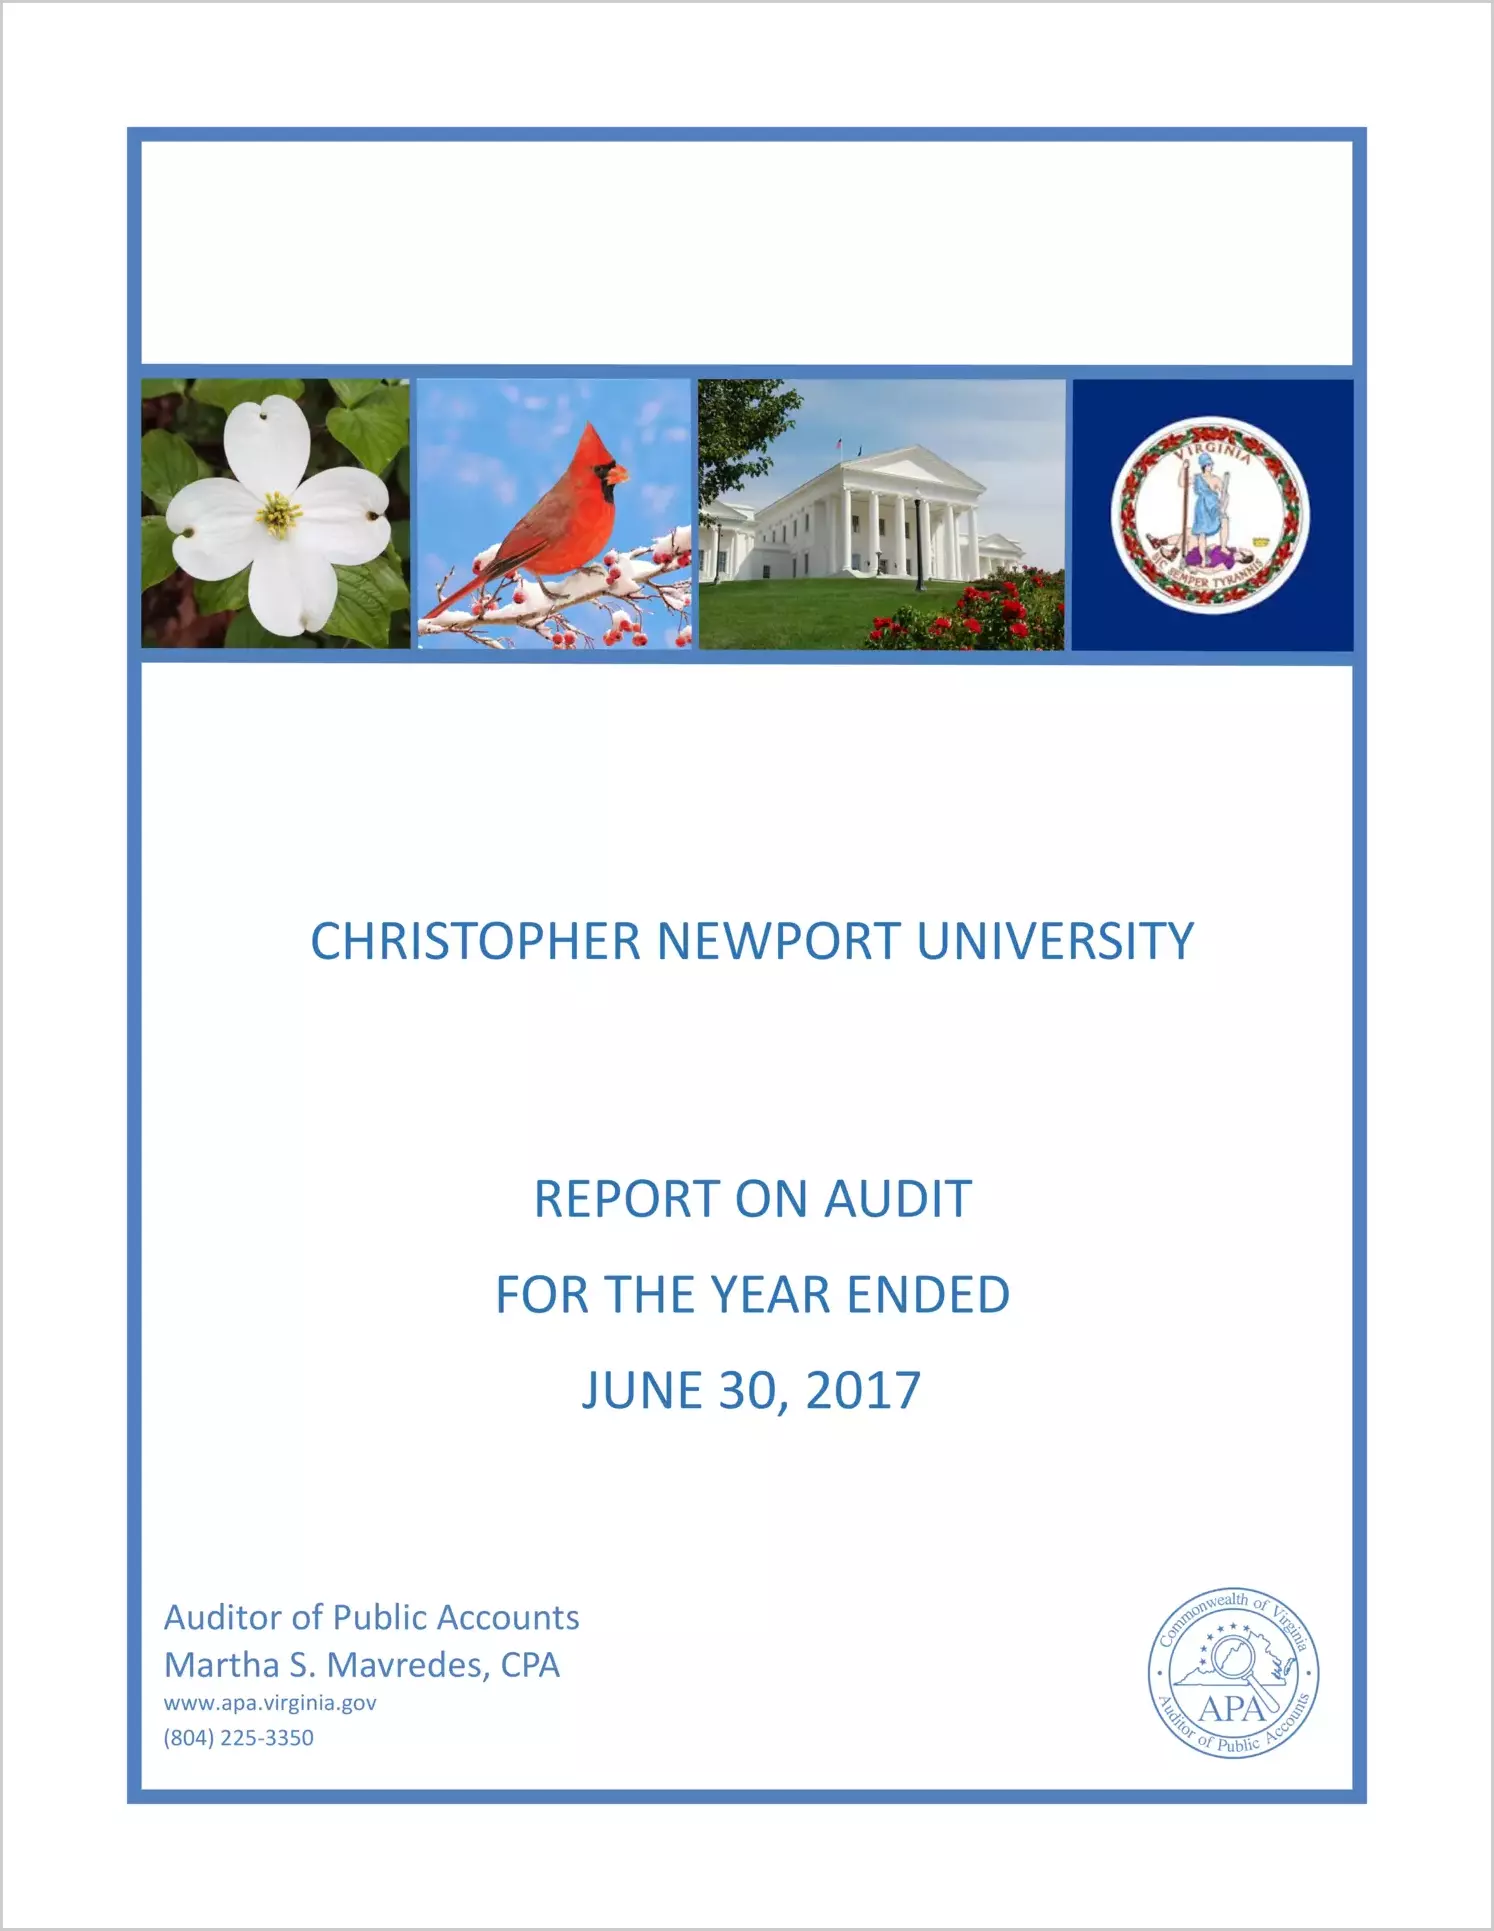 Christopher Newport University for the year ended June 30, 2017